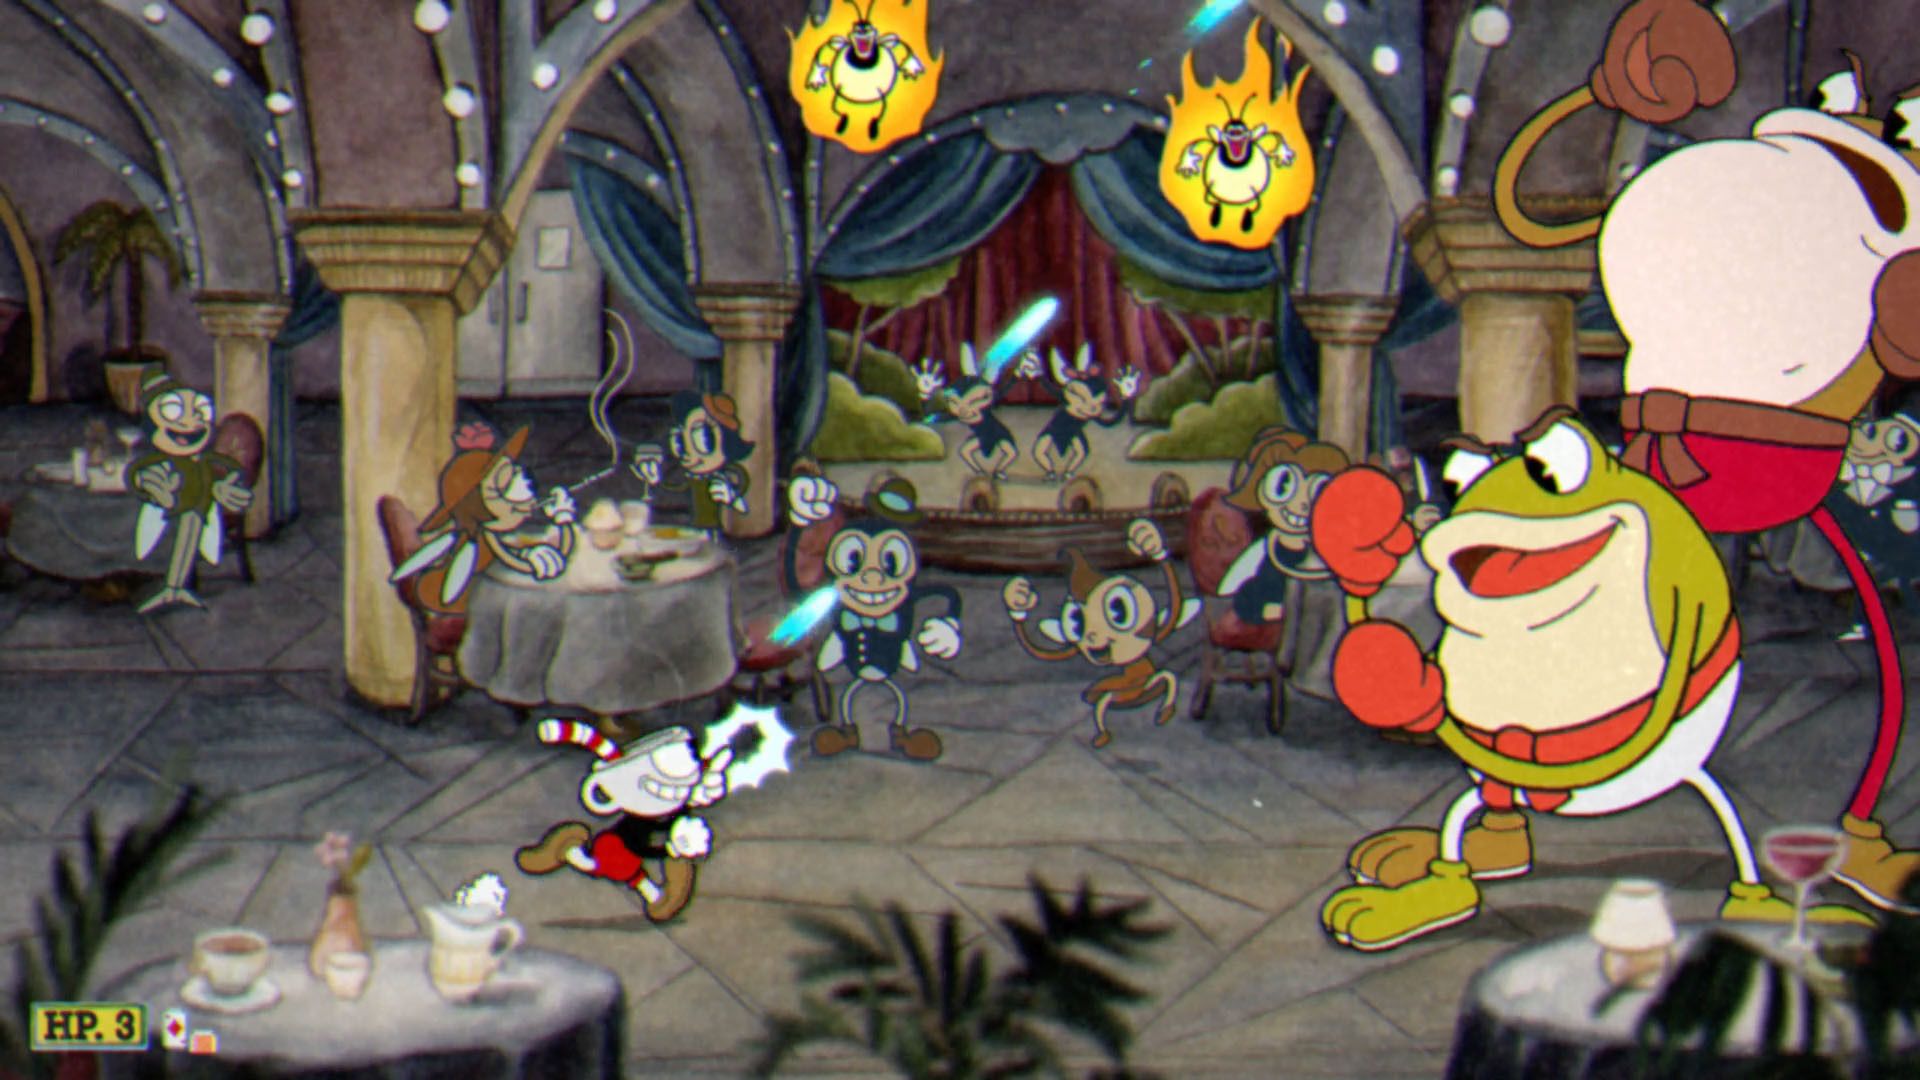 when will cuphead online multiplayer be available